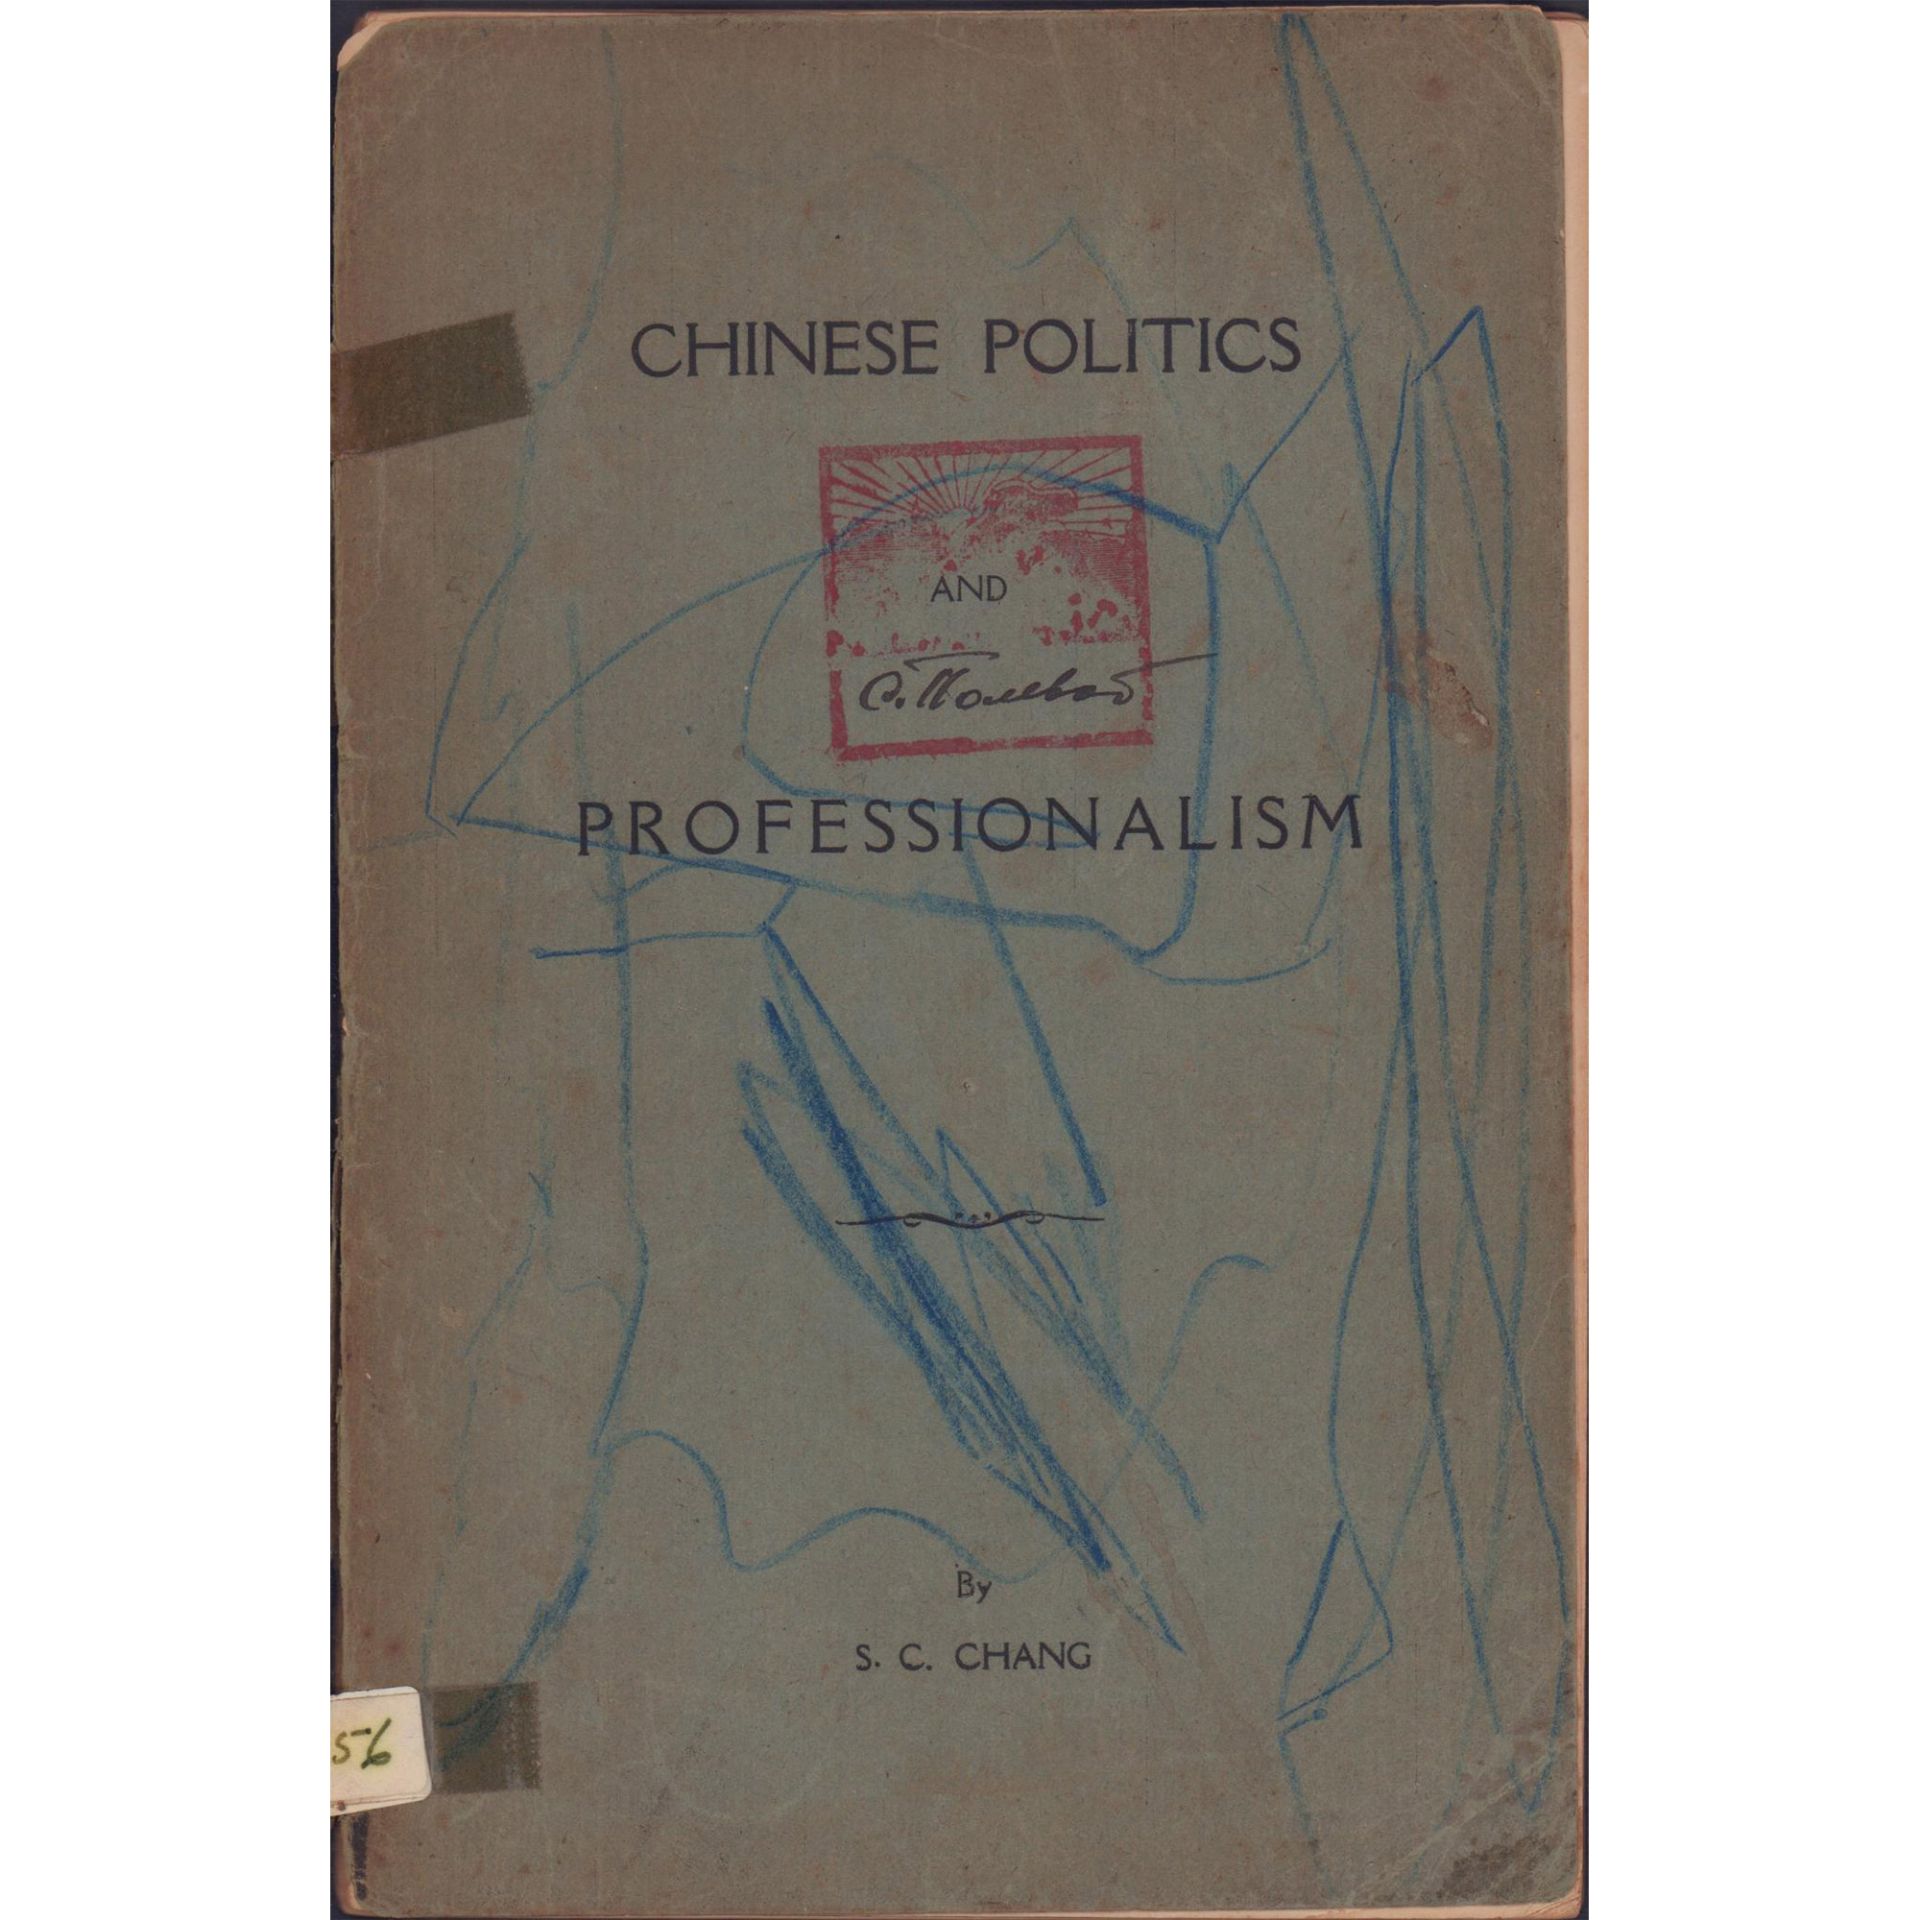 Three Antique Legal American Documents on Chinese Politics - Image 3 of 3